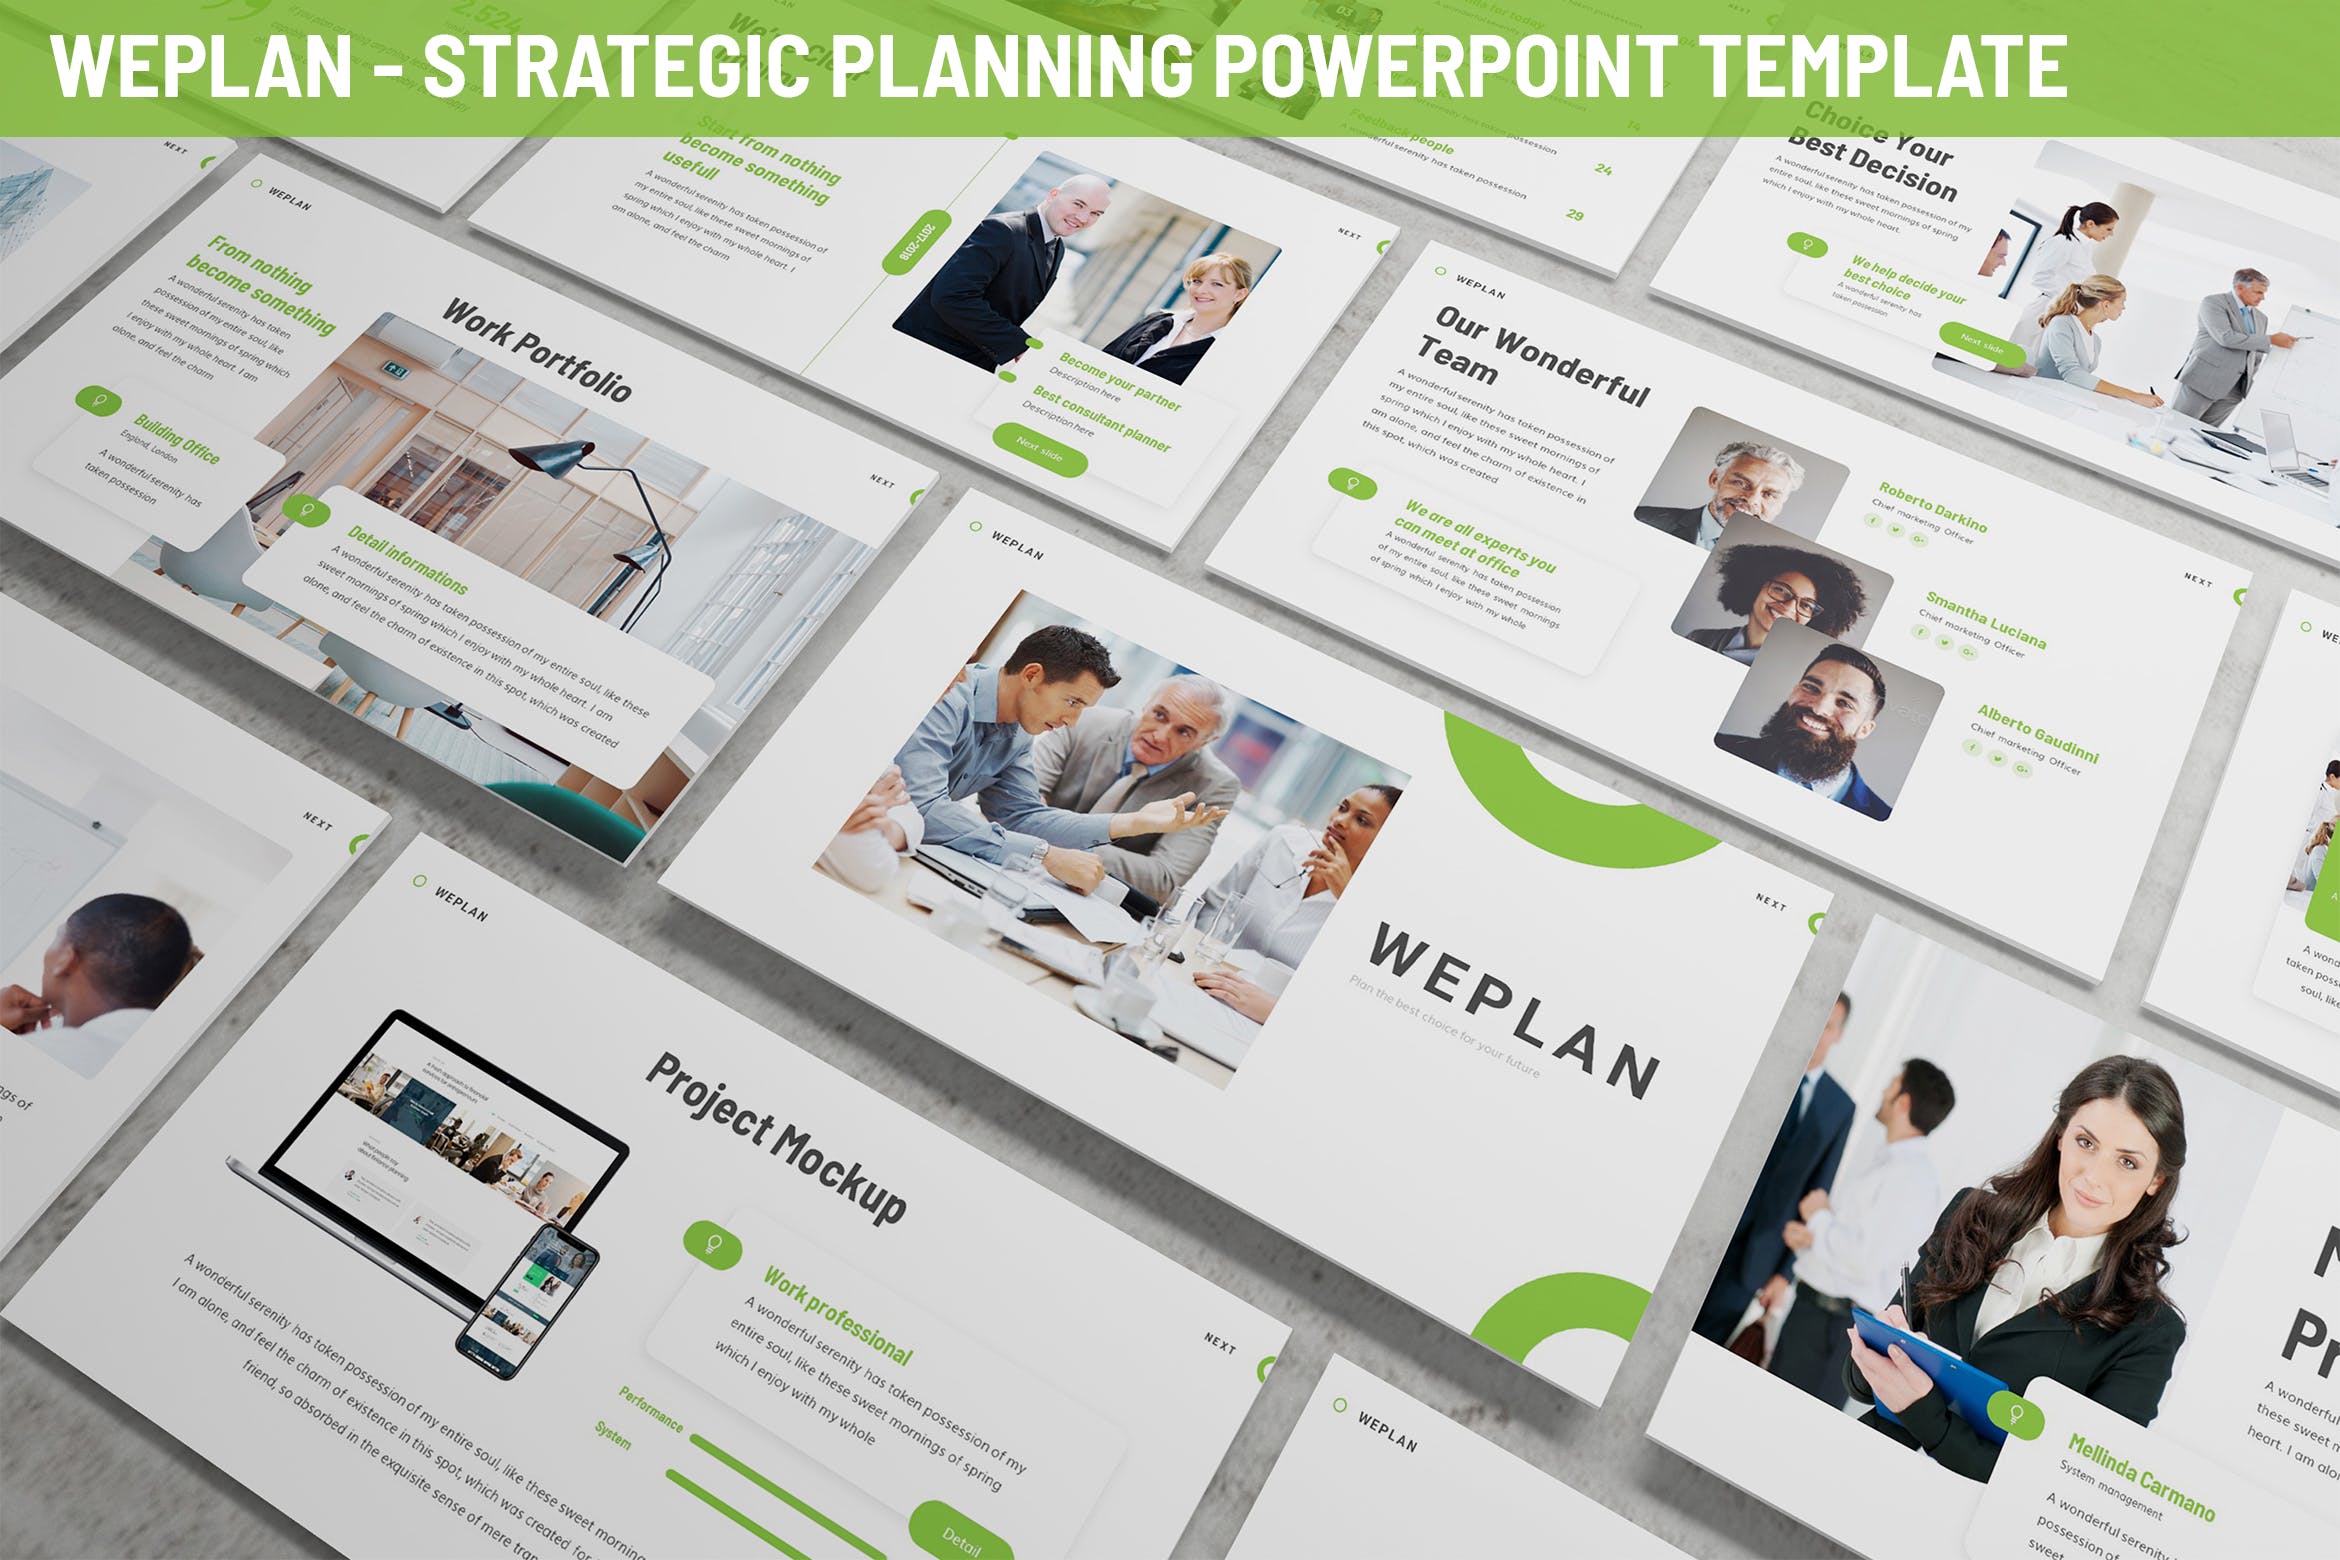 Cover image of Weplan - Strategic Planning Powerpoint Template.